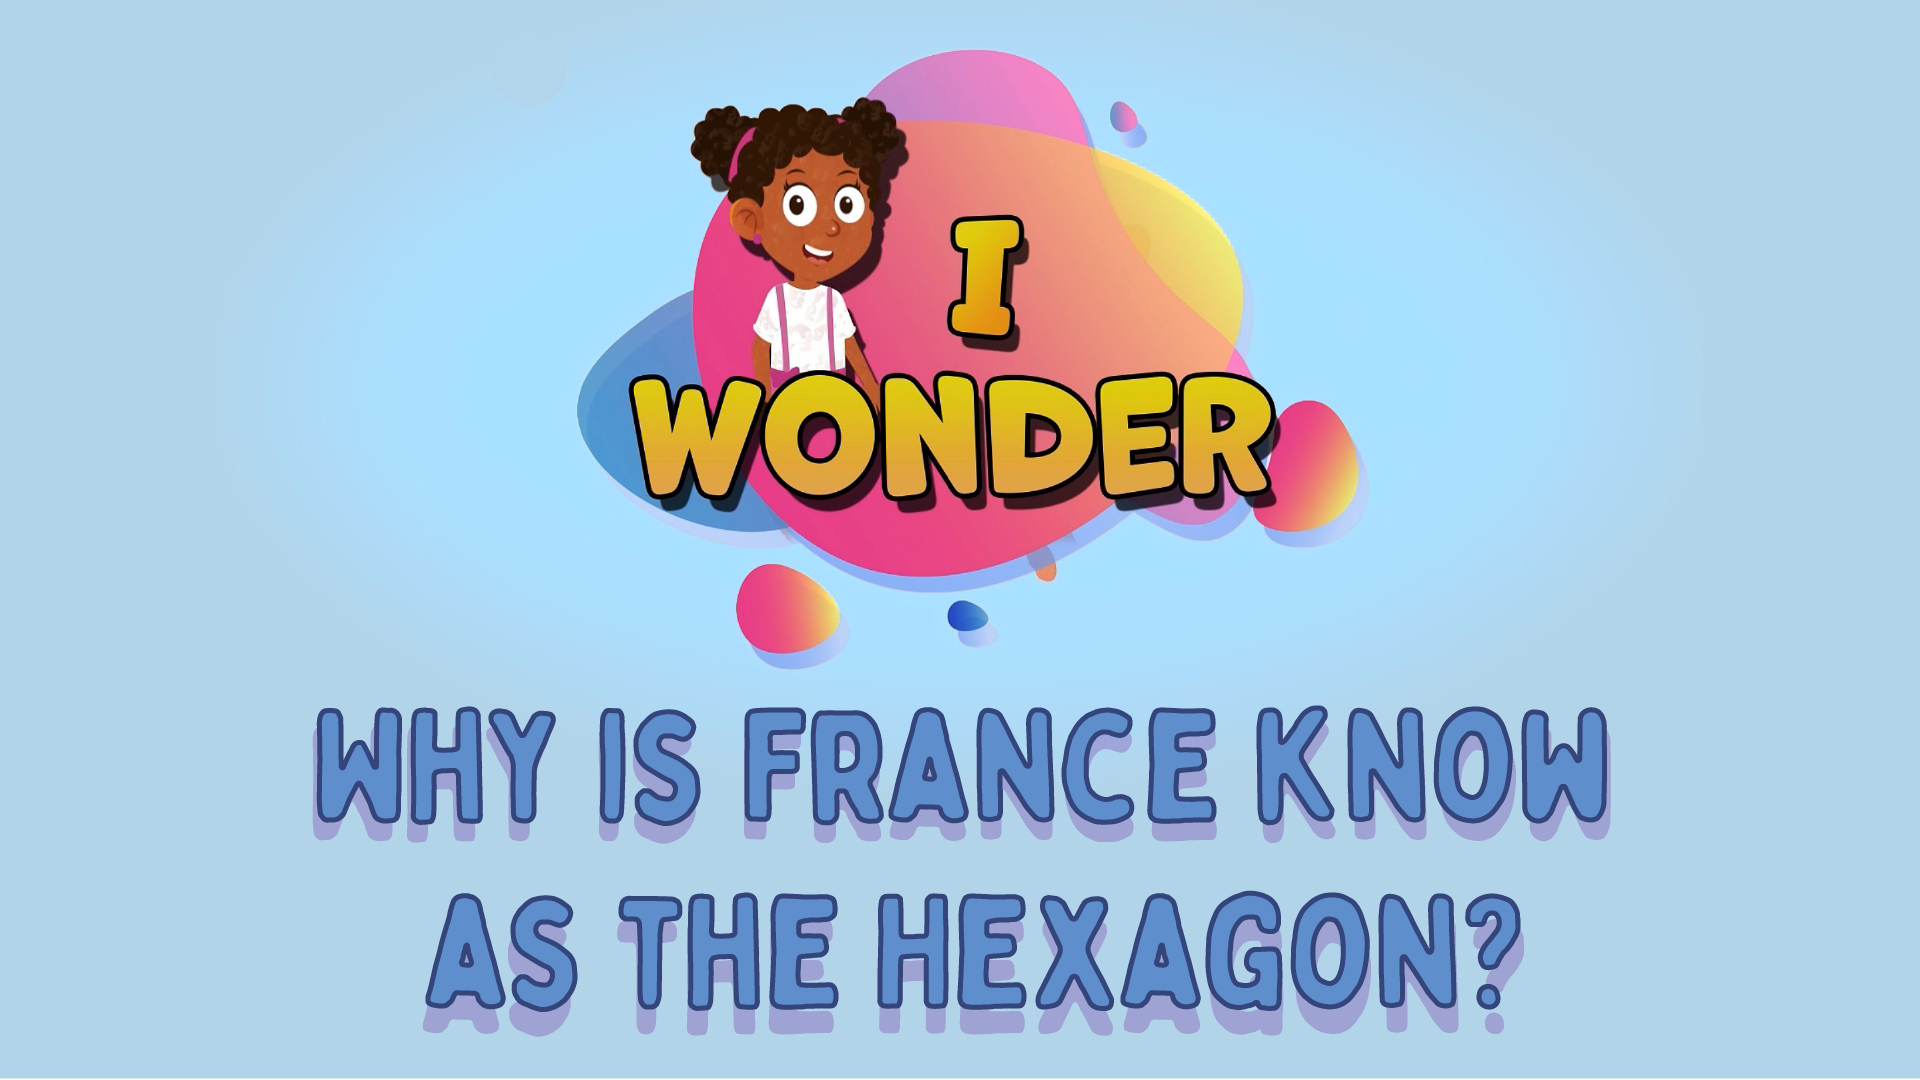 Why Is France Know As The Hexagon?